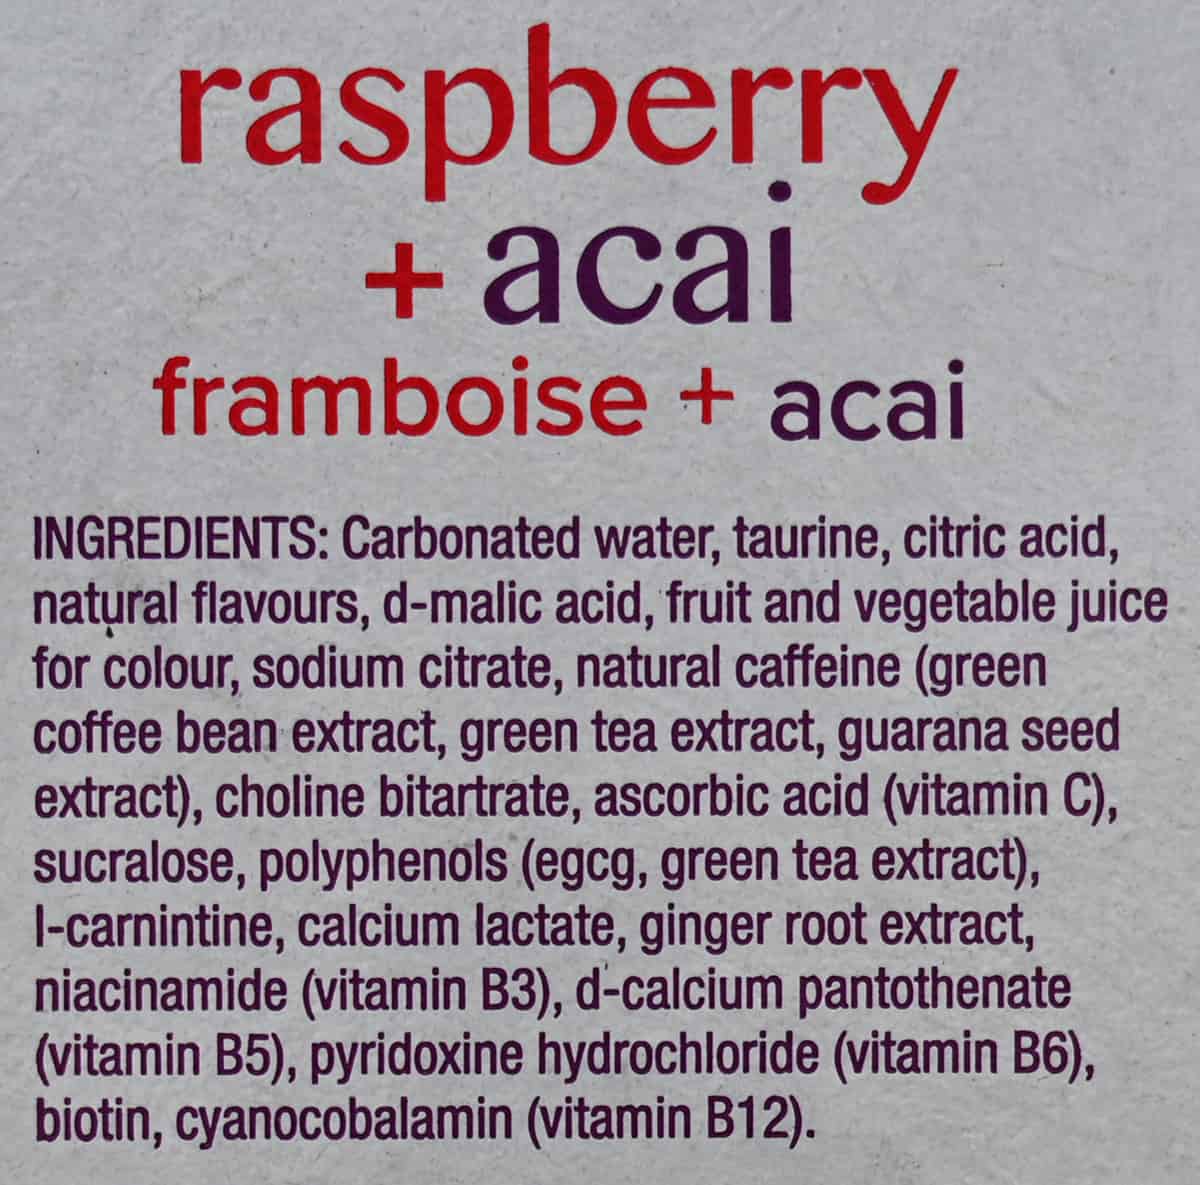 Image of the raspberry acai ingredients list from the box.